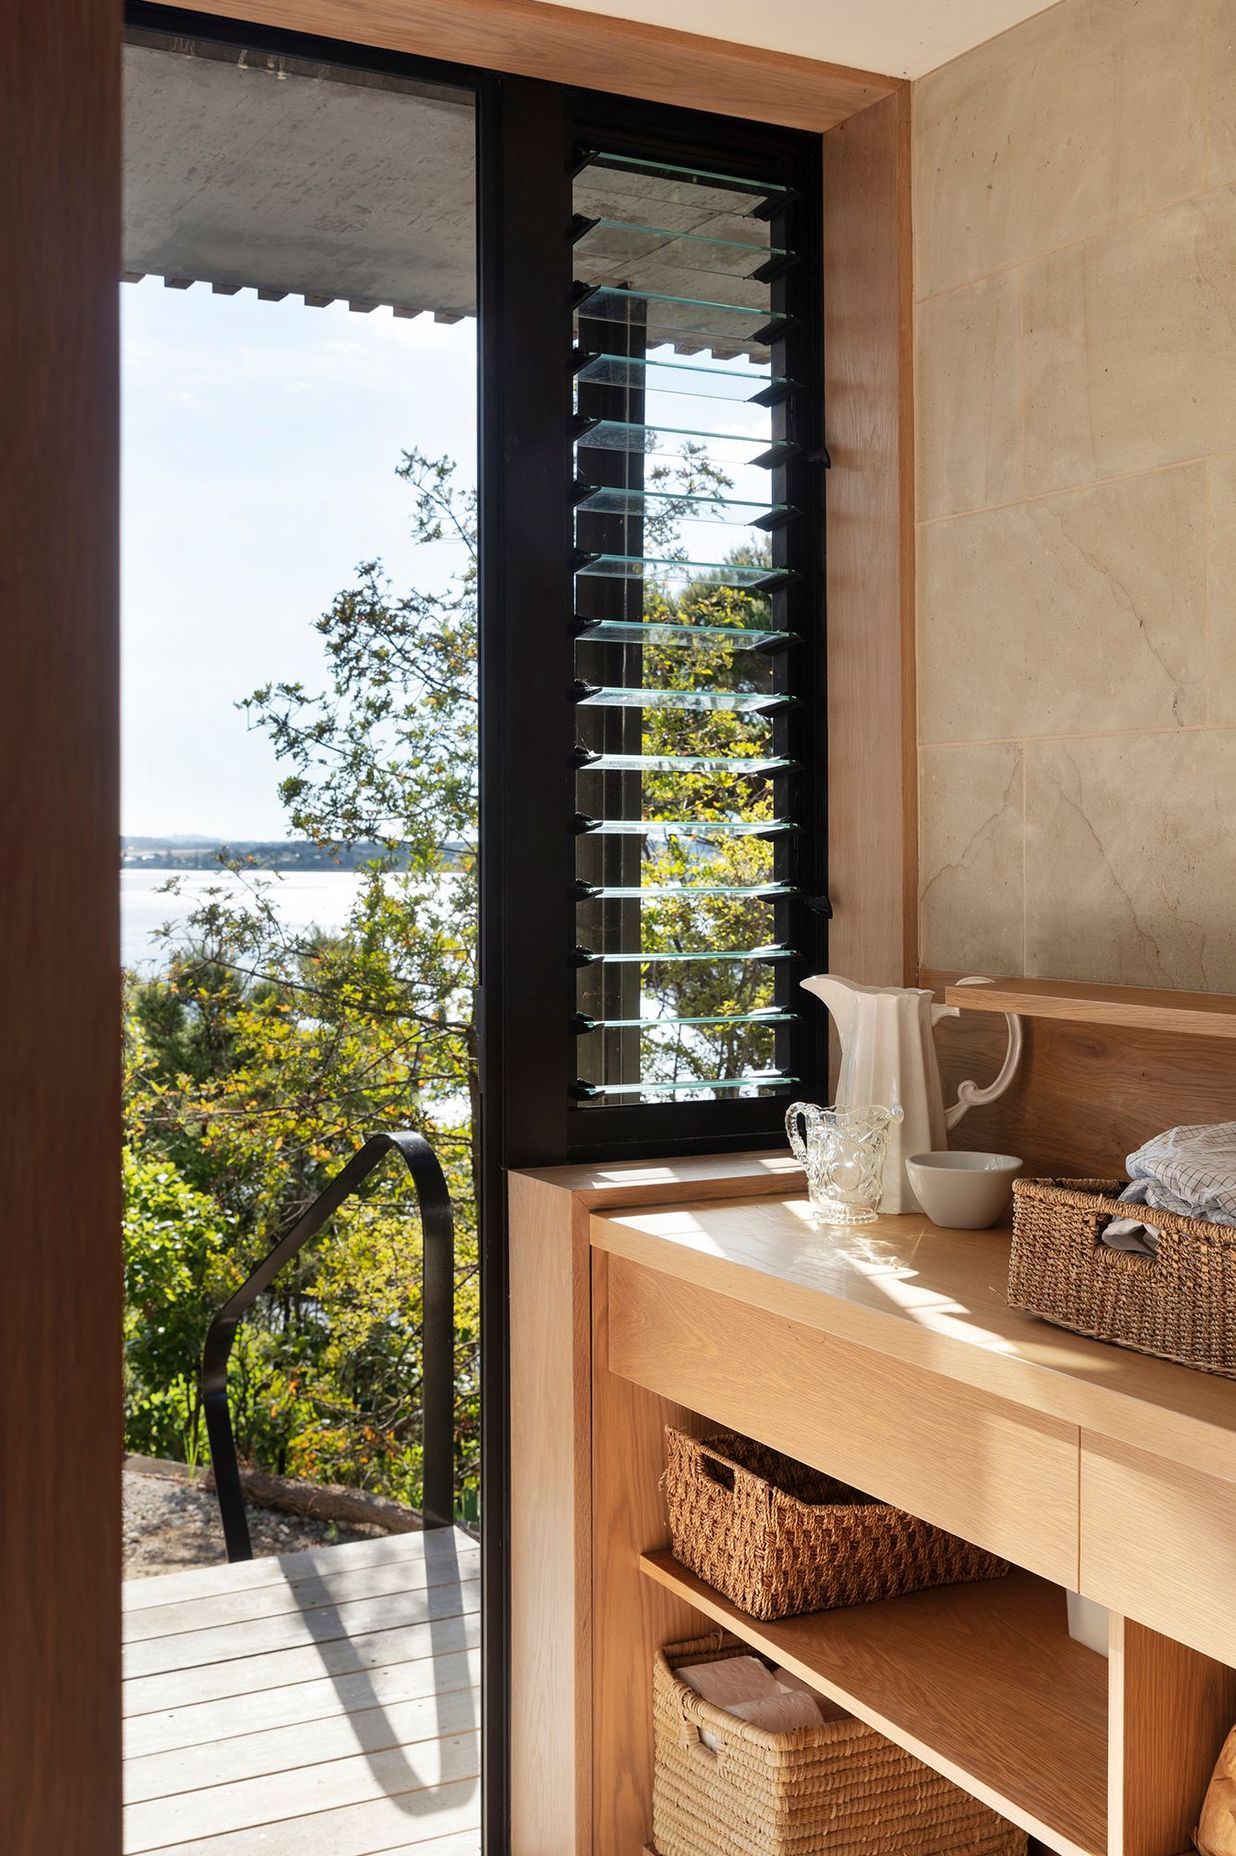 The timber-rich laundry has louvred windows for extra ventilation.